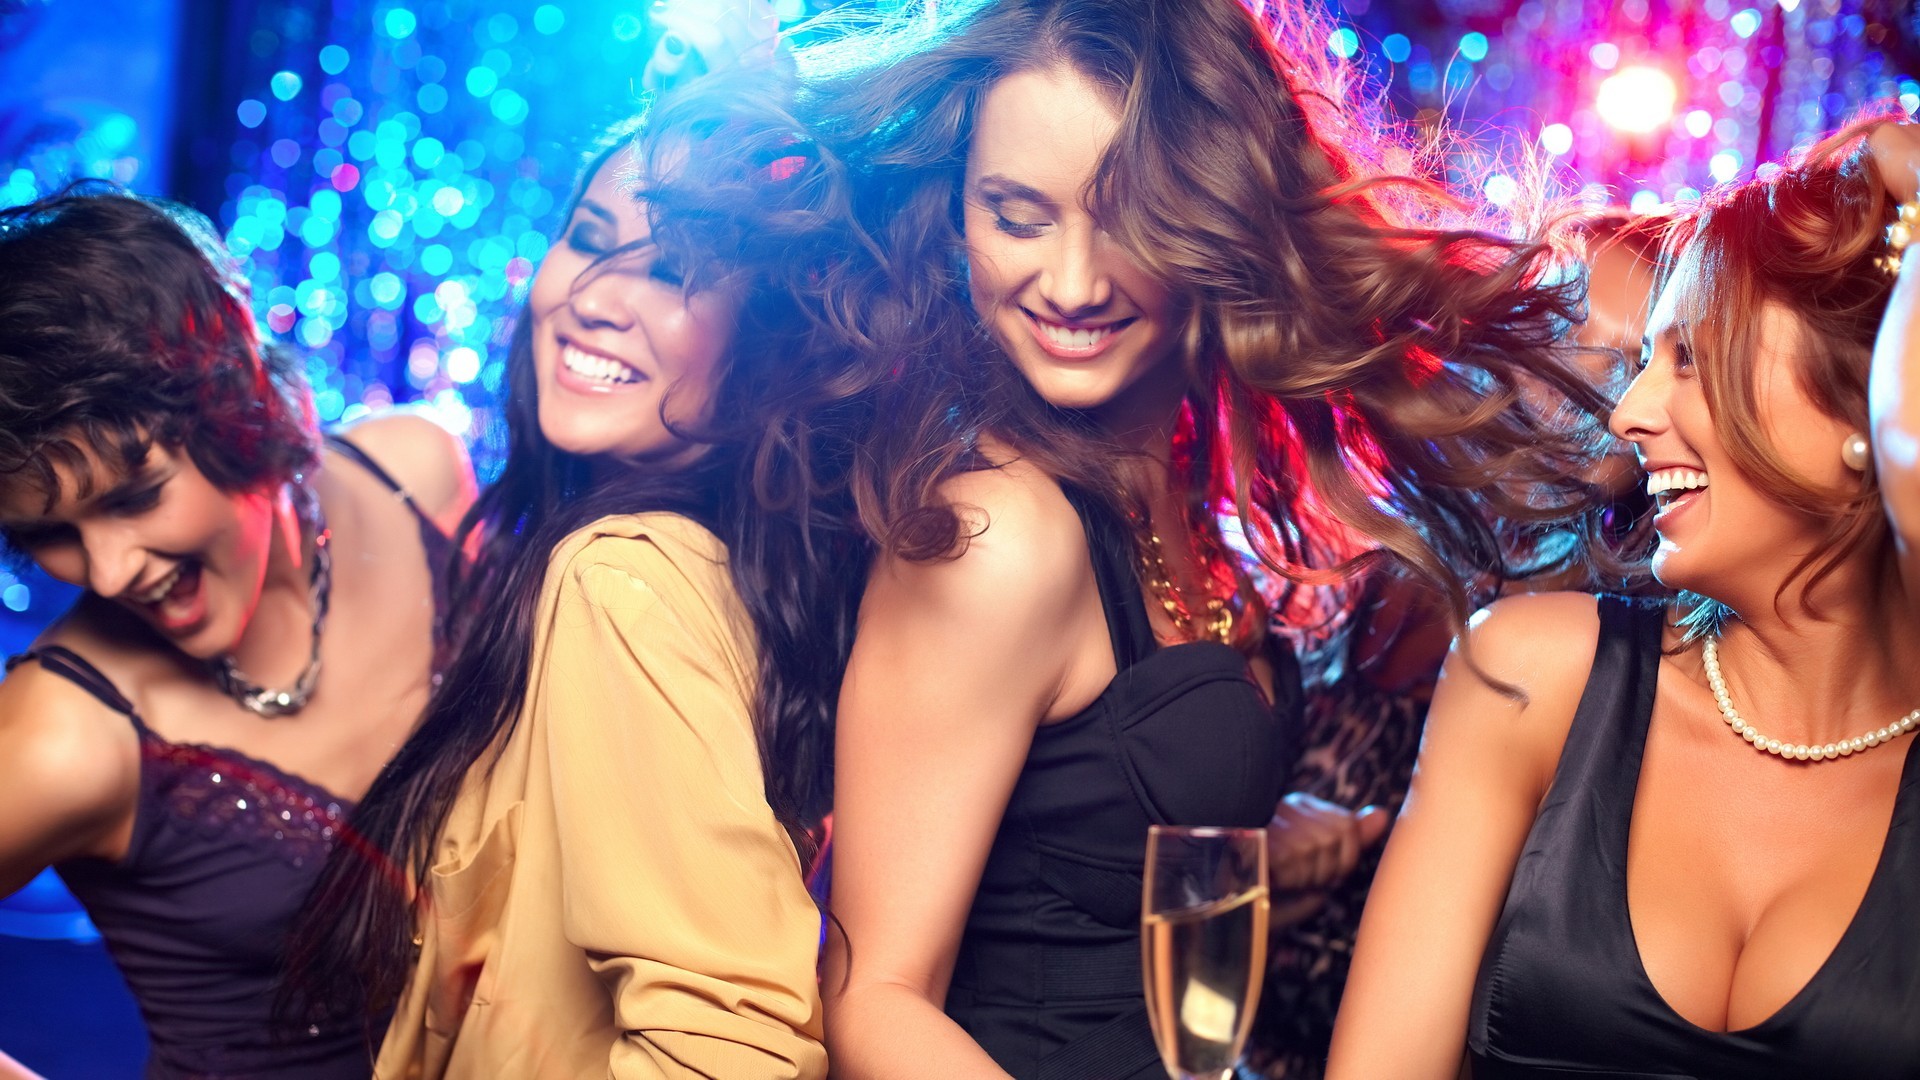 Download wallpaper girls, party, fun, dance, section mood in resolution 192...